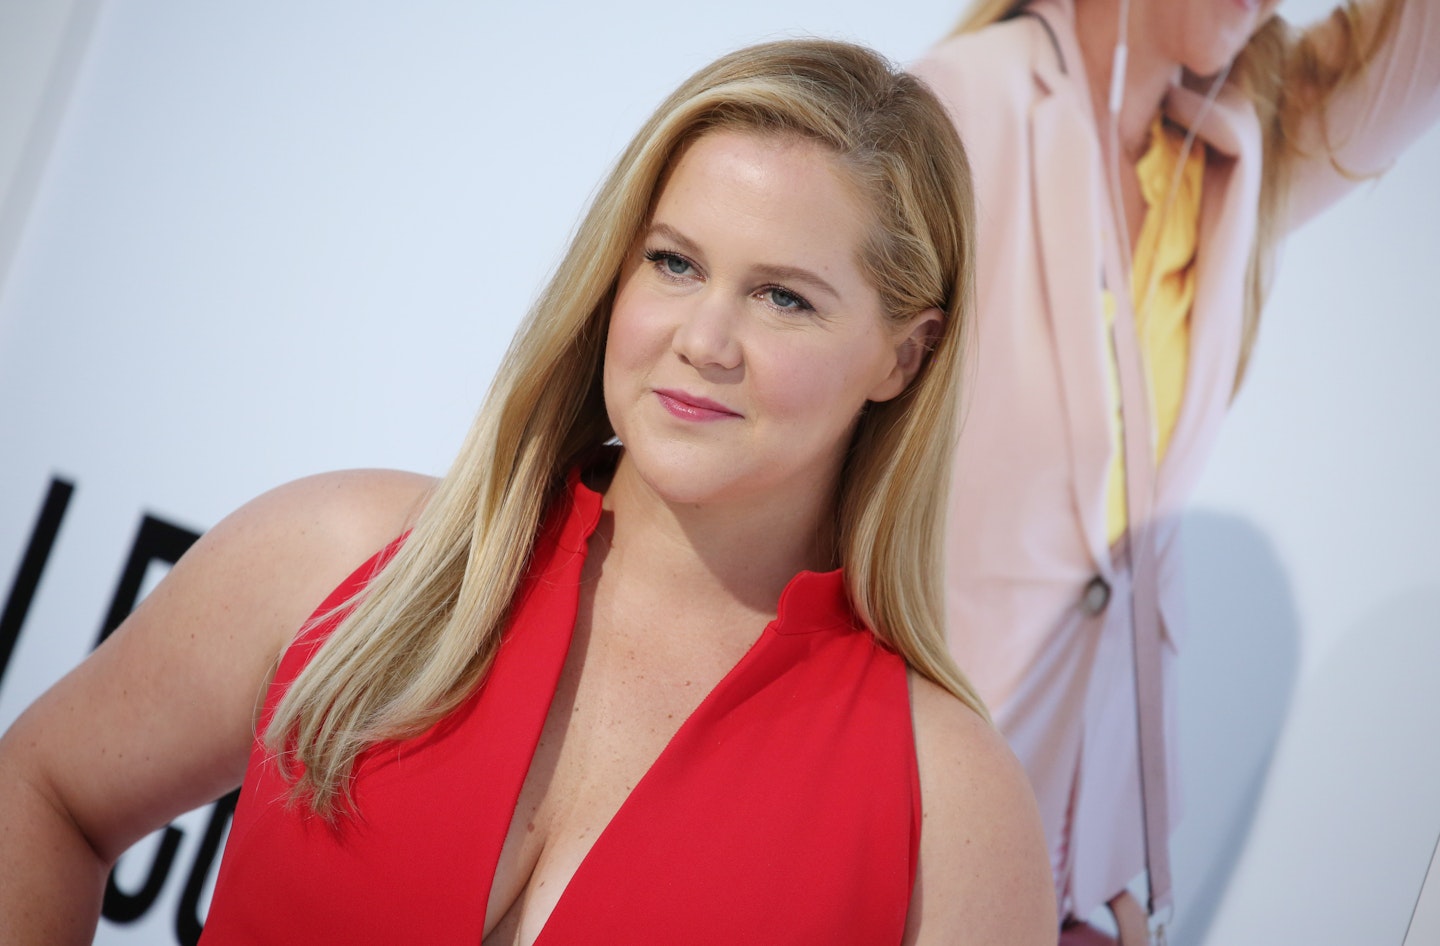 The Reaction To Amy Schumer’s Pregnancy Announcement Is Not OK